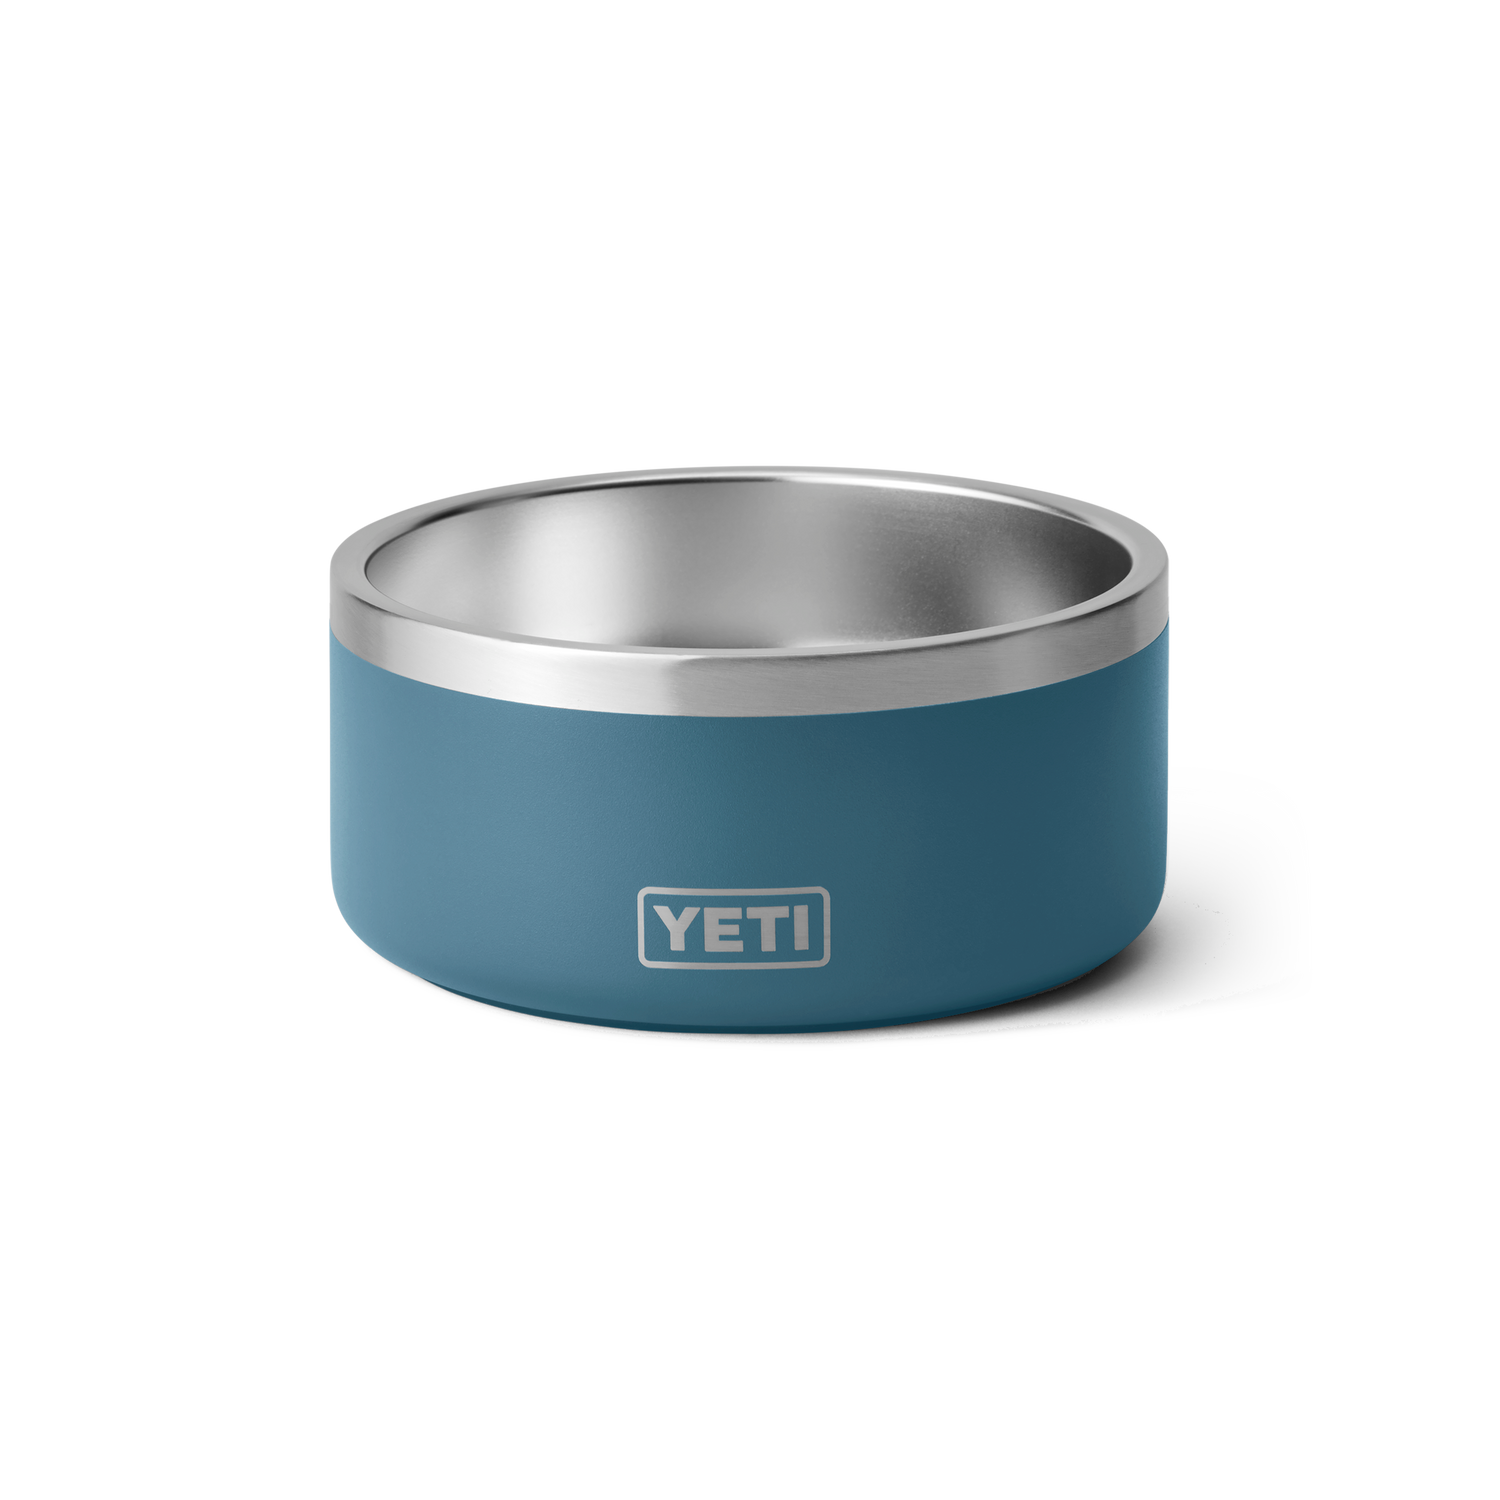 YETI: The Limited-Edition Nordic Blue Collection